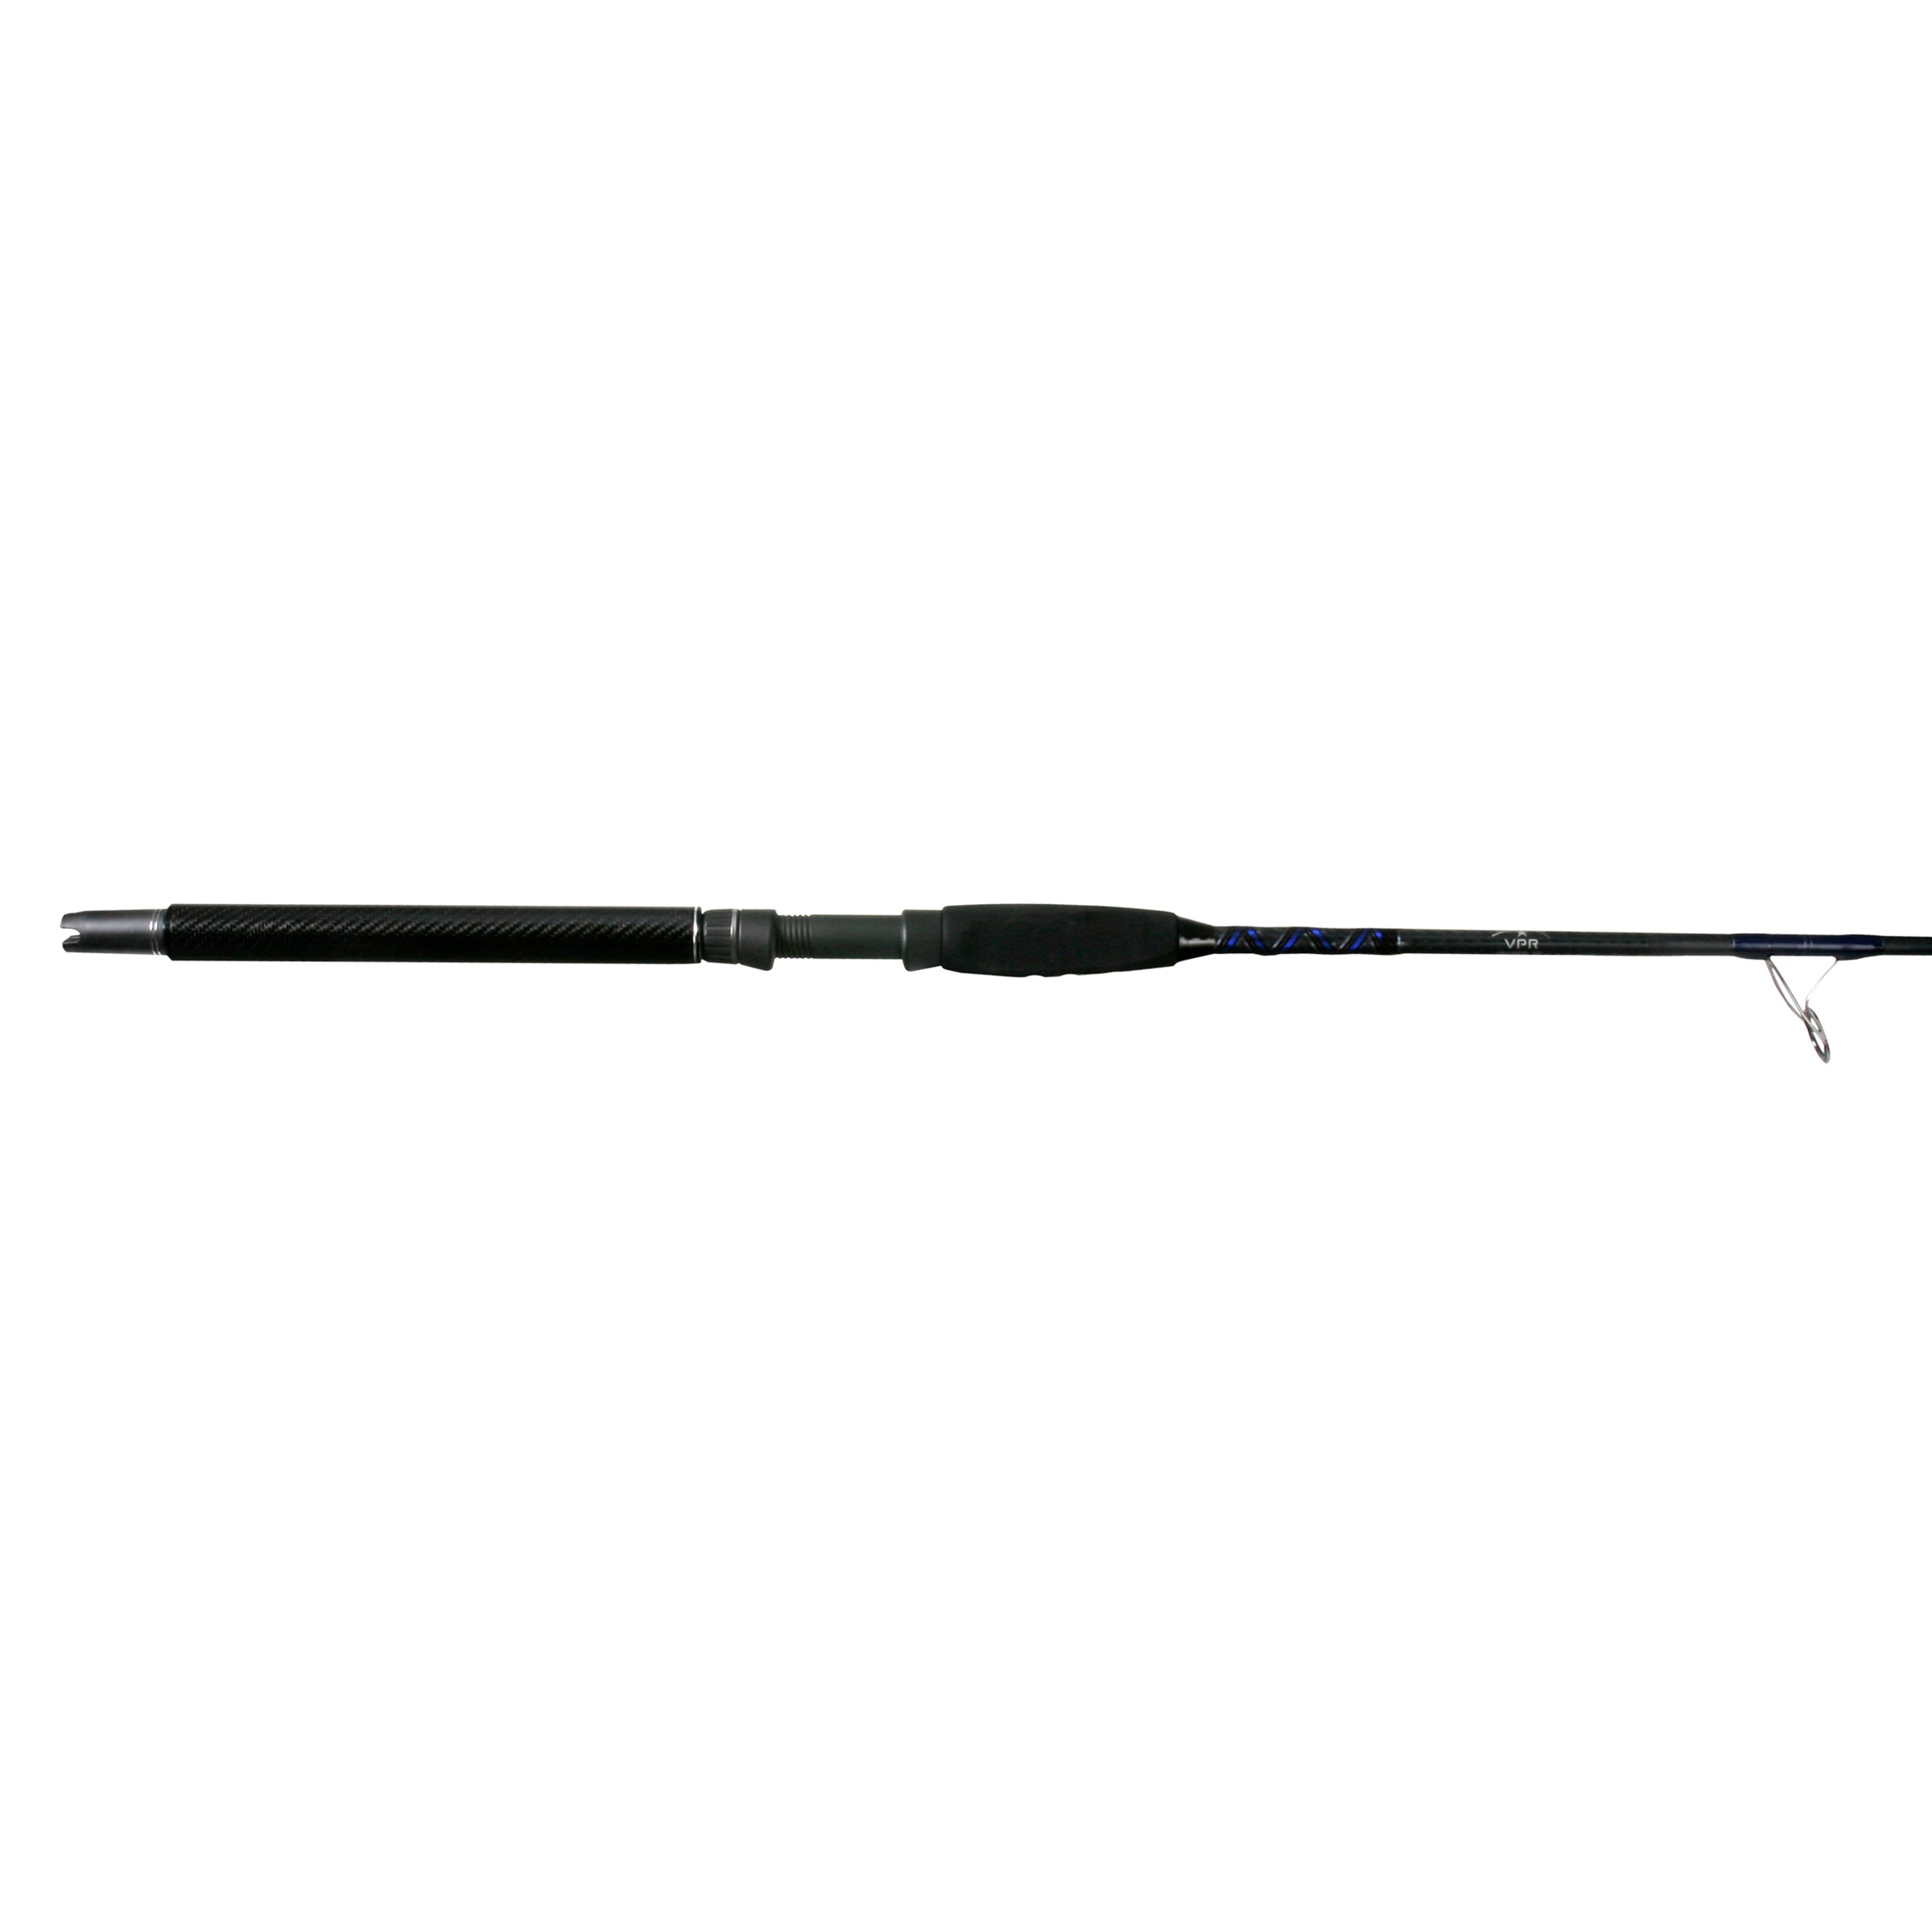 Star Rods B50100hca Handcrafted Stand Up Conventional Rod 6' 50-100lb AFTCO Roller Stripper, Size: One Size